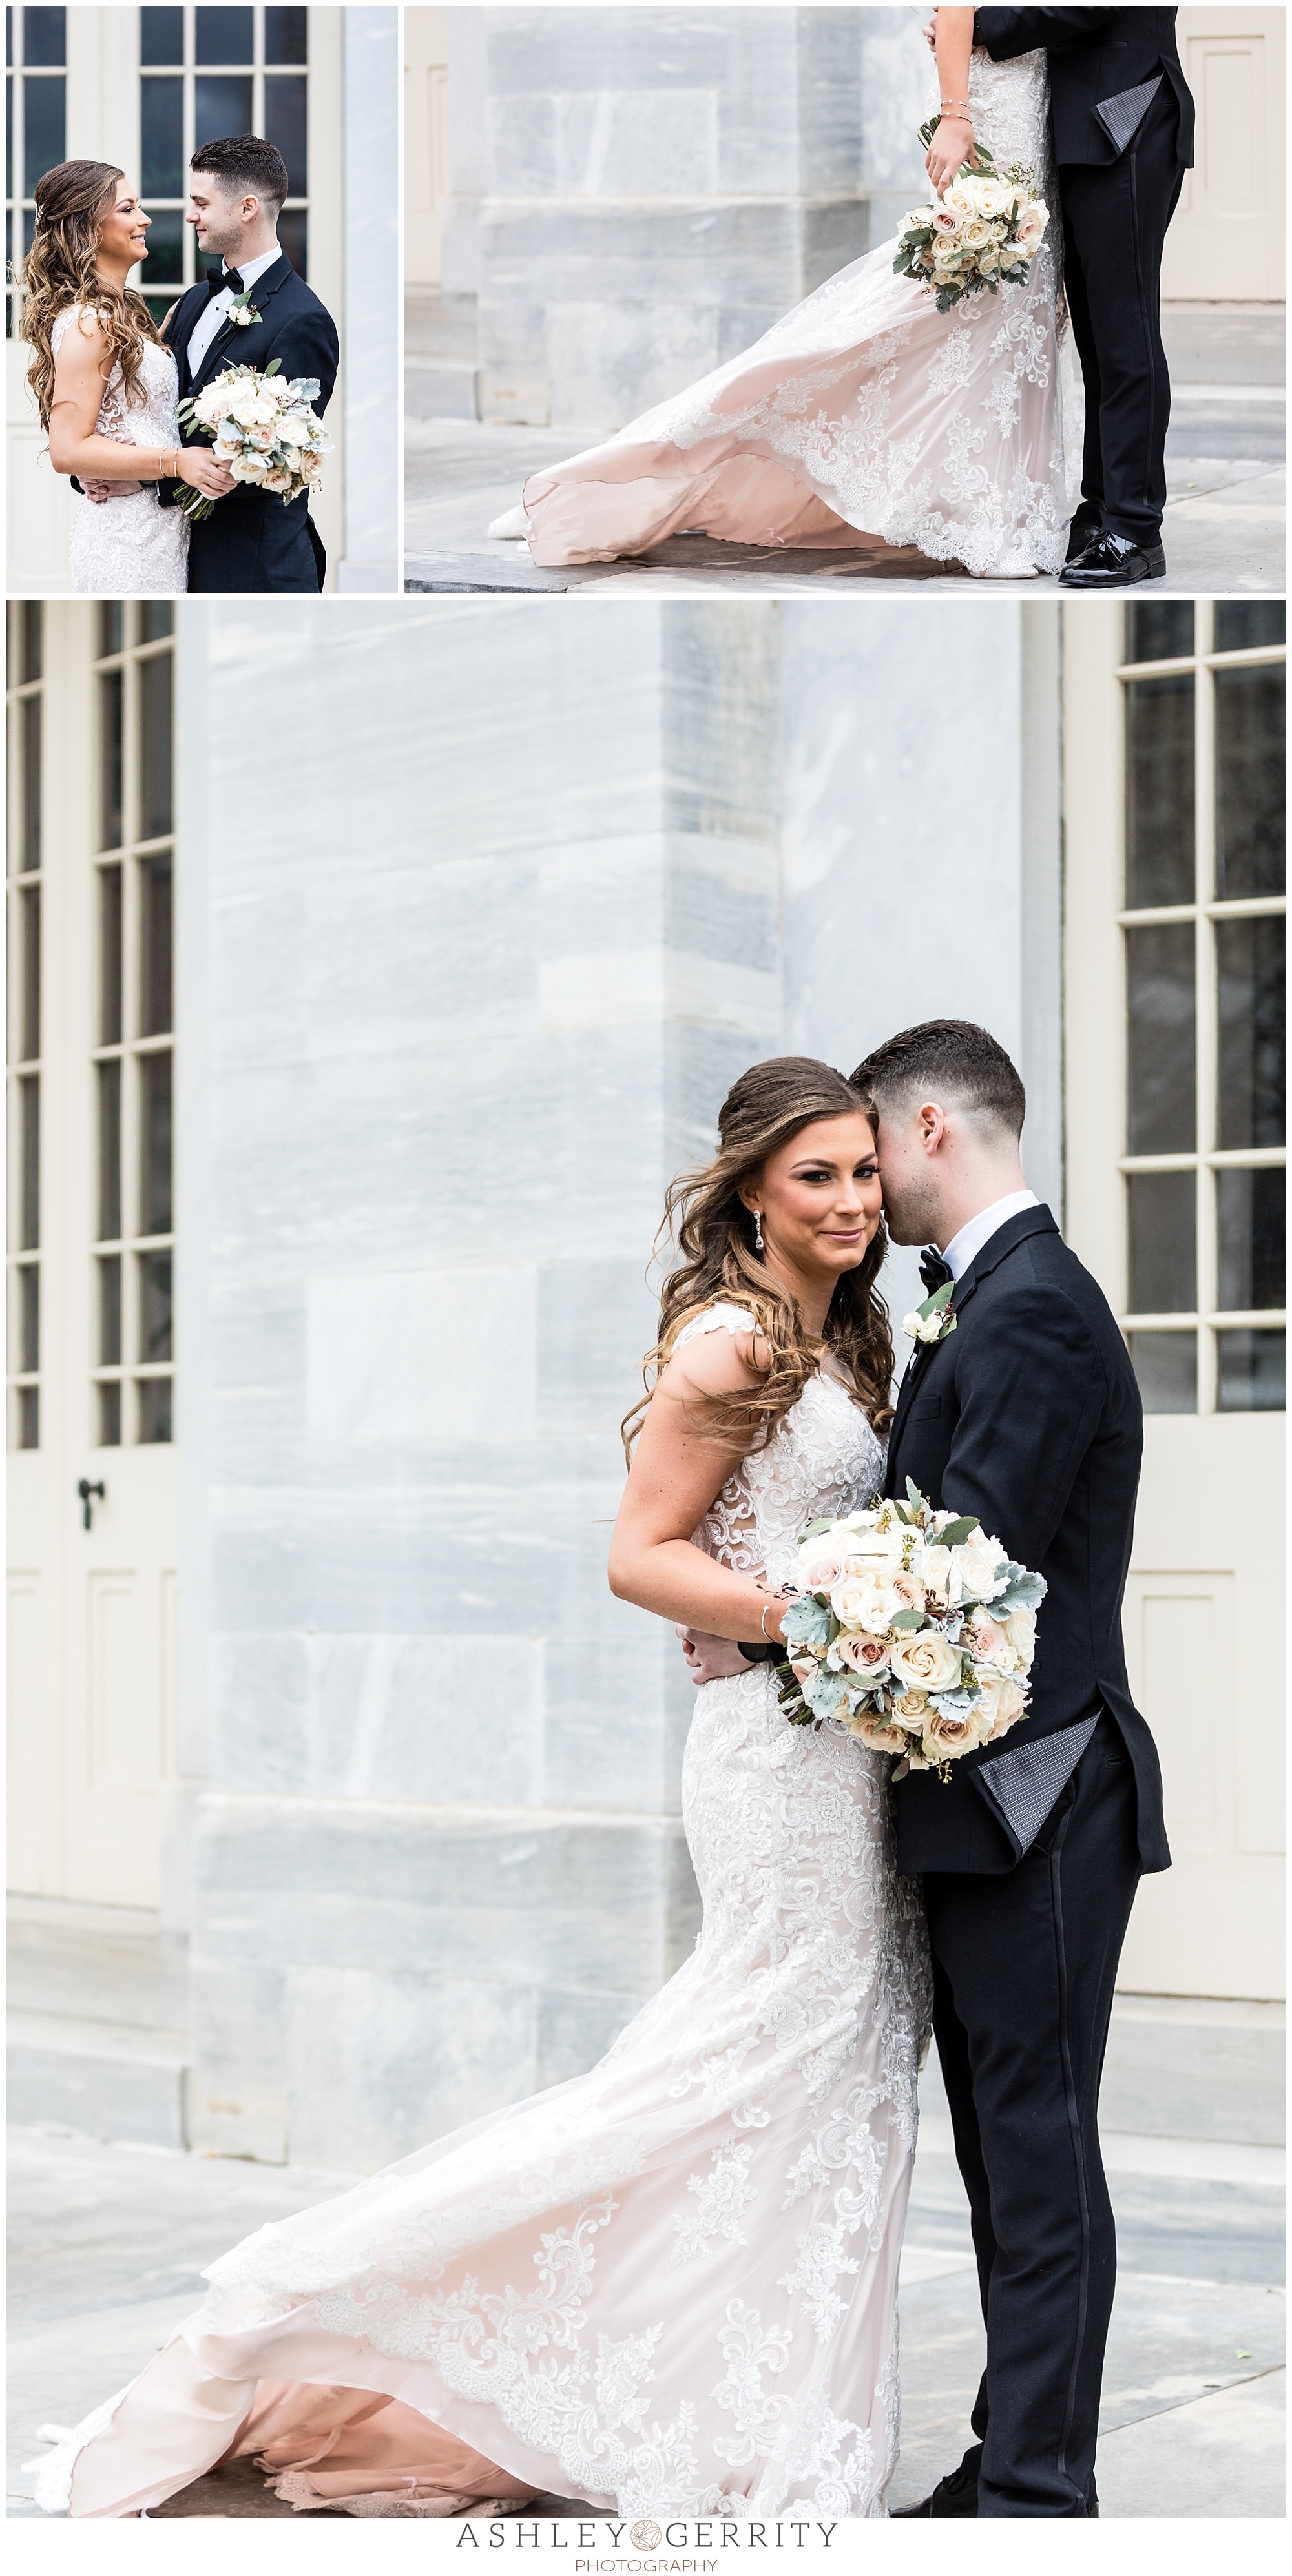 bride and groom embracing portraits hugging smiling bridal bouquet and dress train